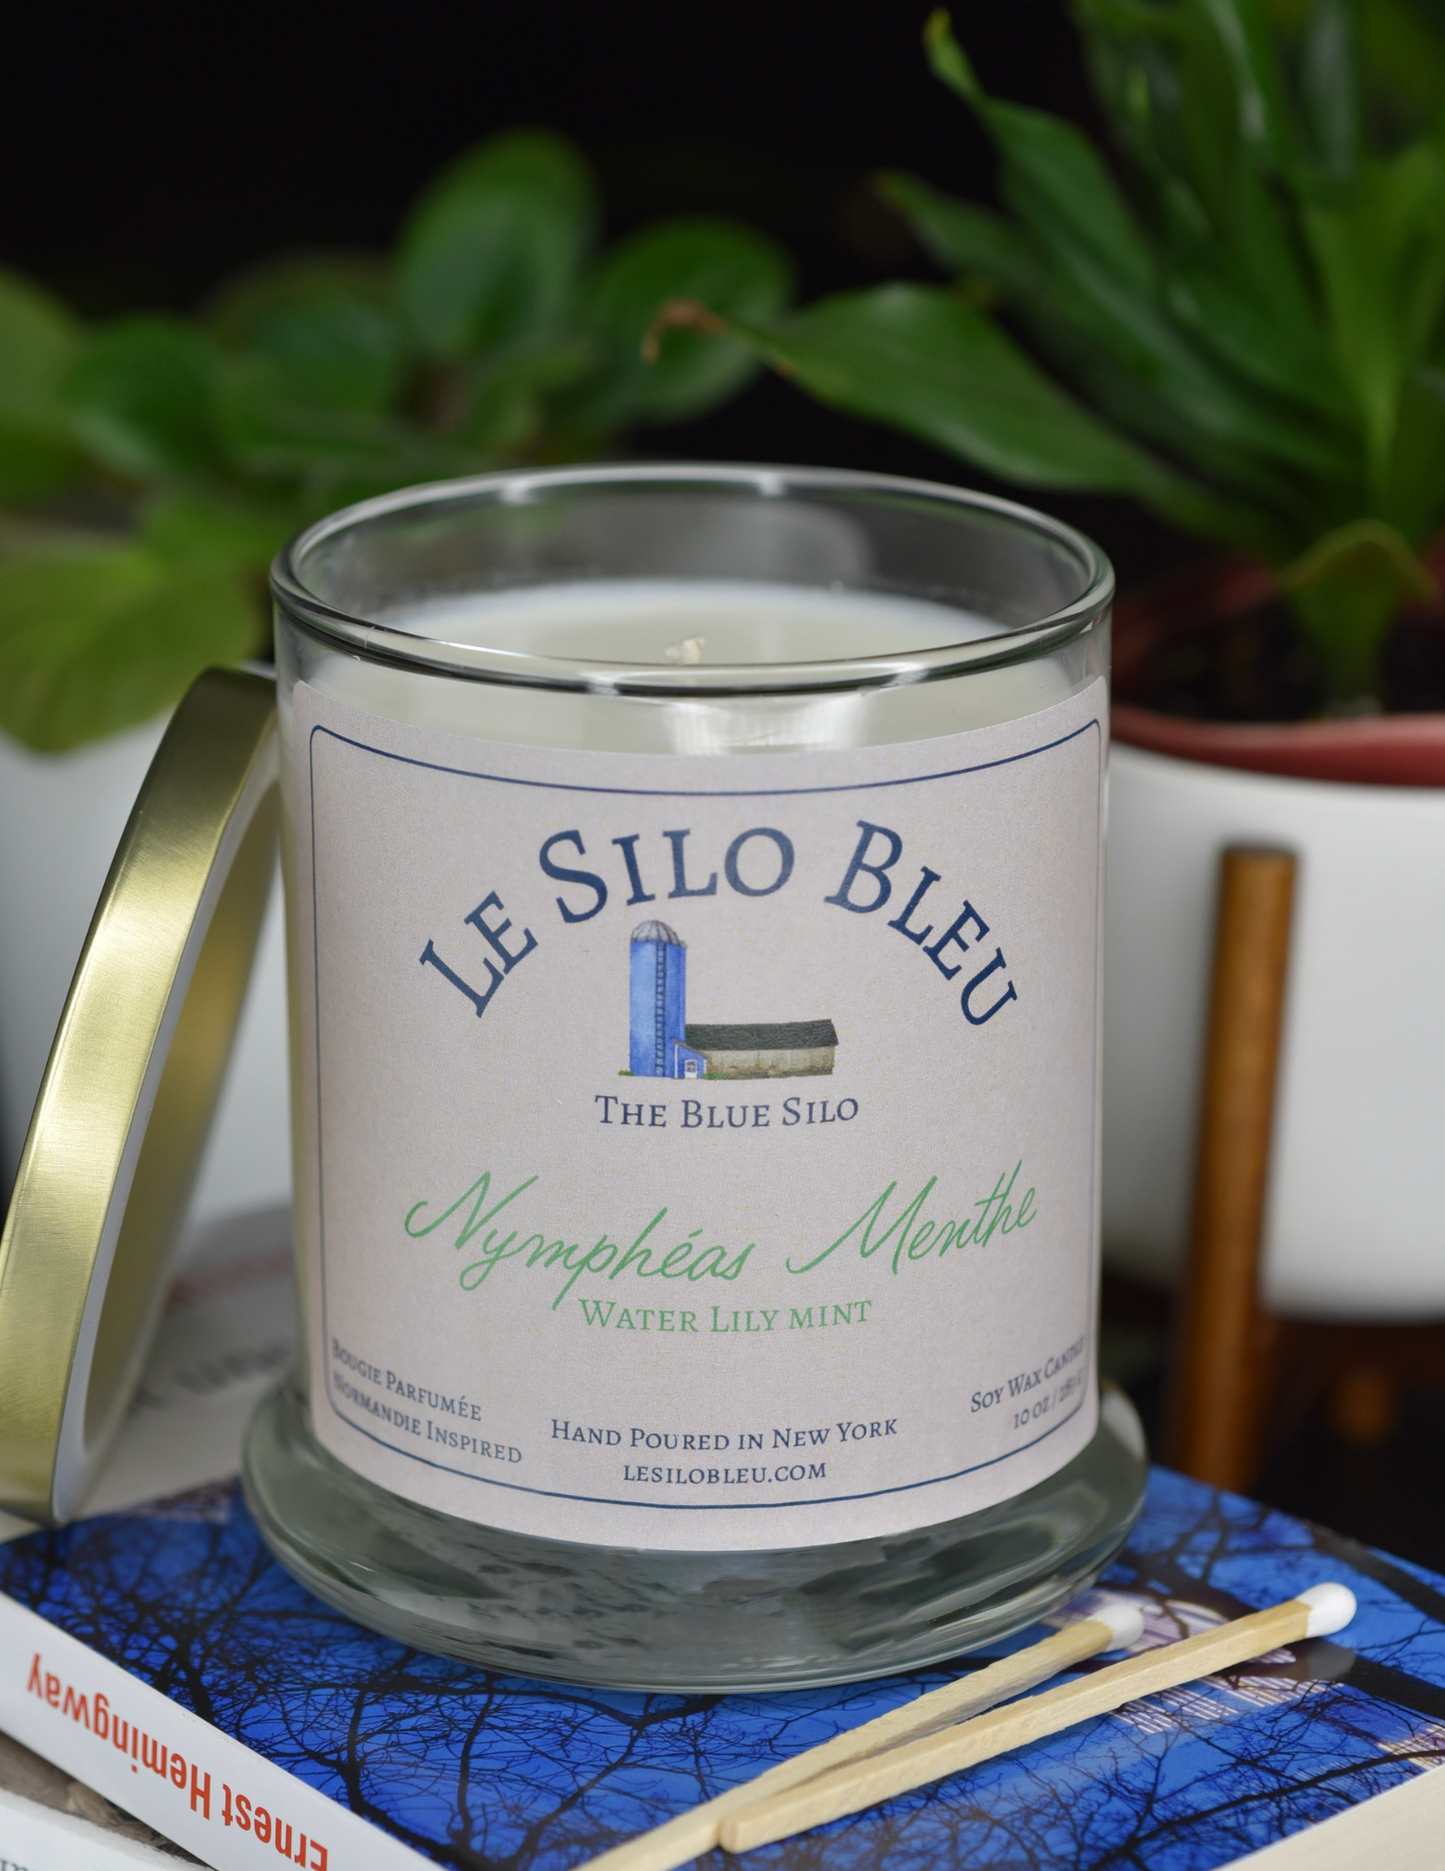 A waterlily and mint scented candle is sitting on top of a French books with a plant in a white pot in the background.